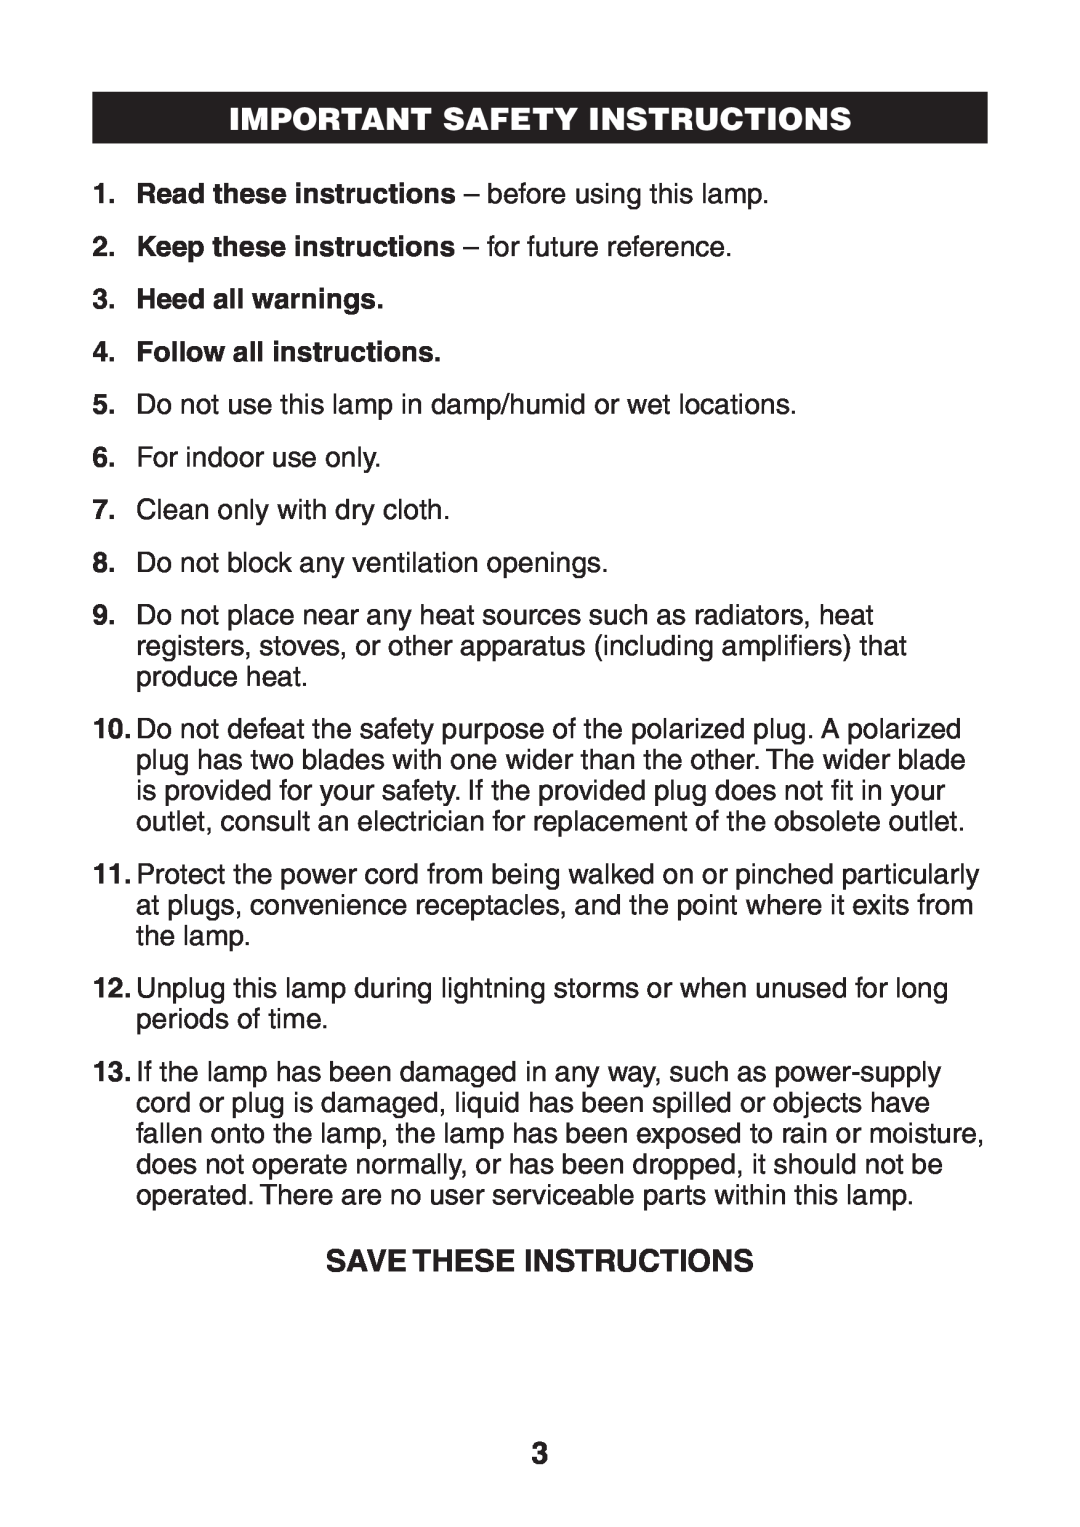 Verilux VT03 manual Save These Instructions, Keep these instructions - for future reference, Important Safety Instructions 